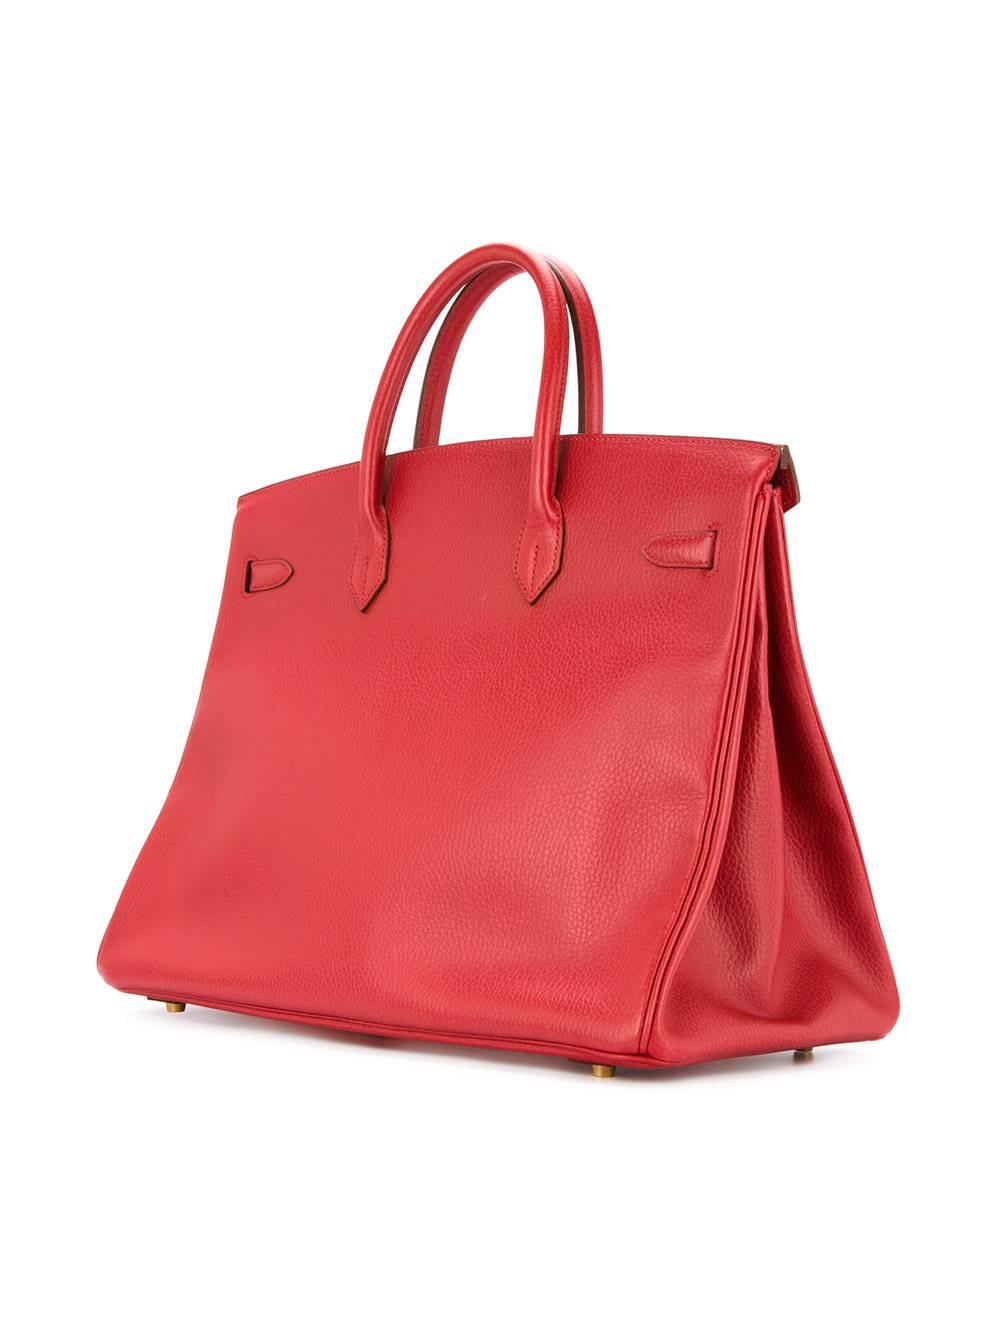 Women's Hermes Birkin 40 Red Leather Gold Travel Carryall Top Handle Satchel Tote